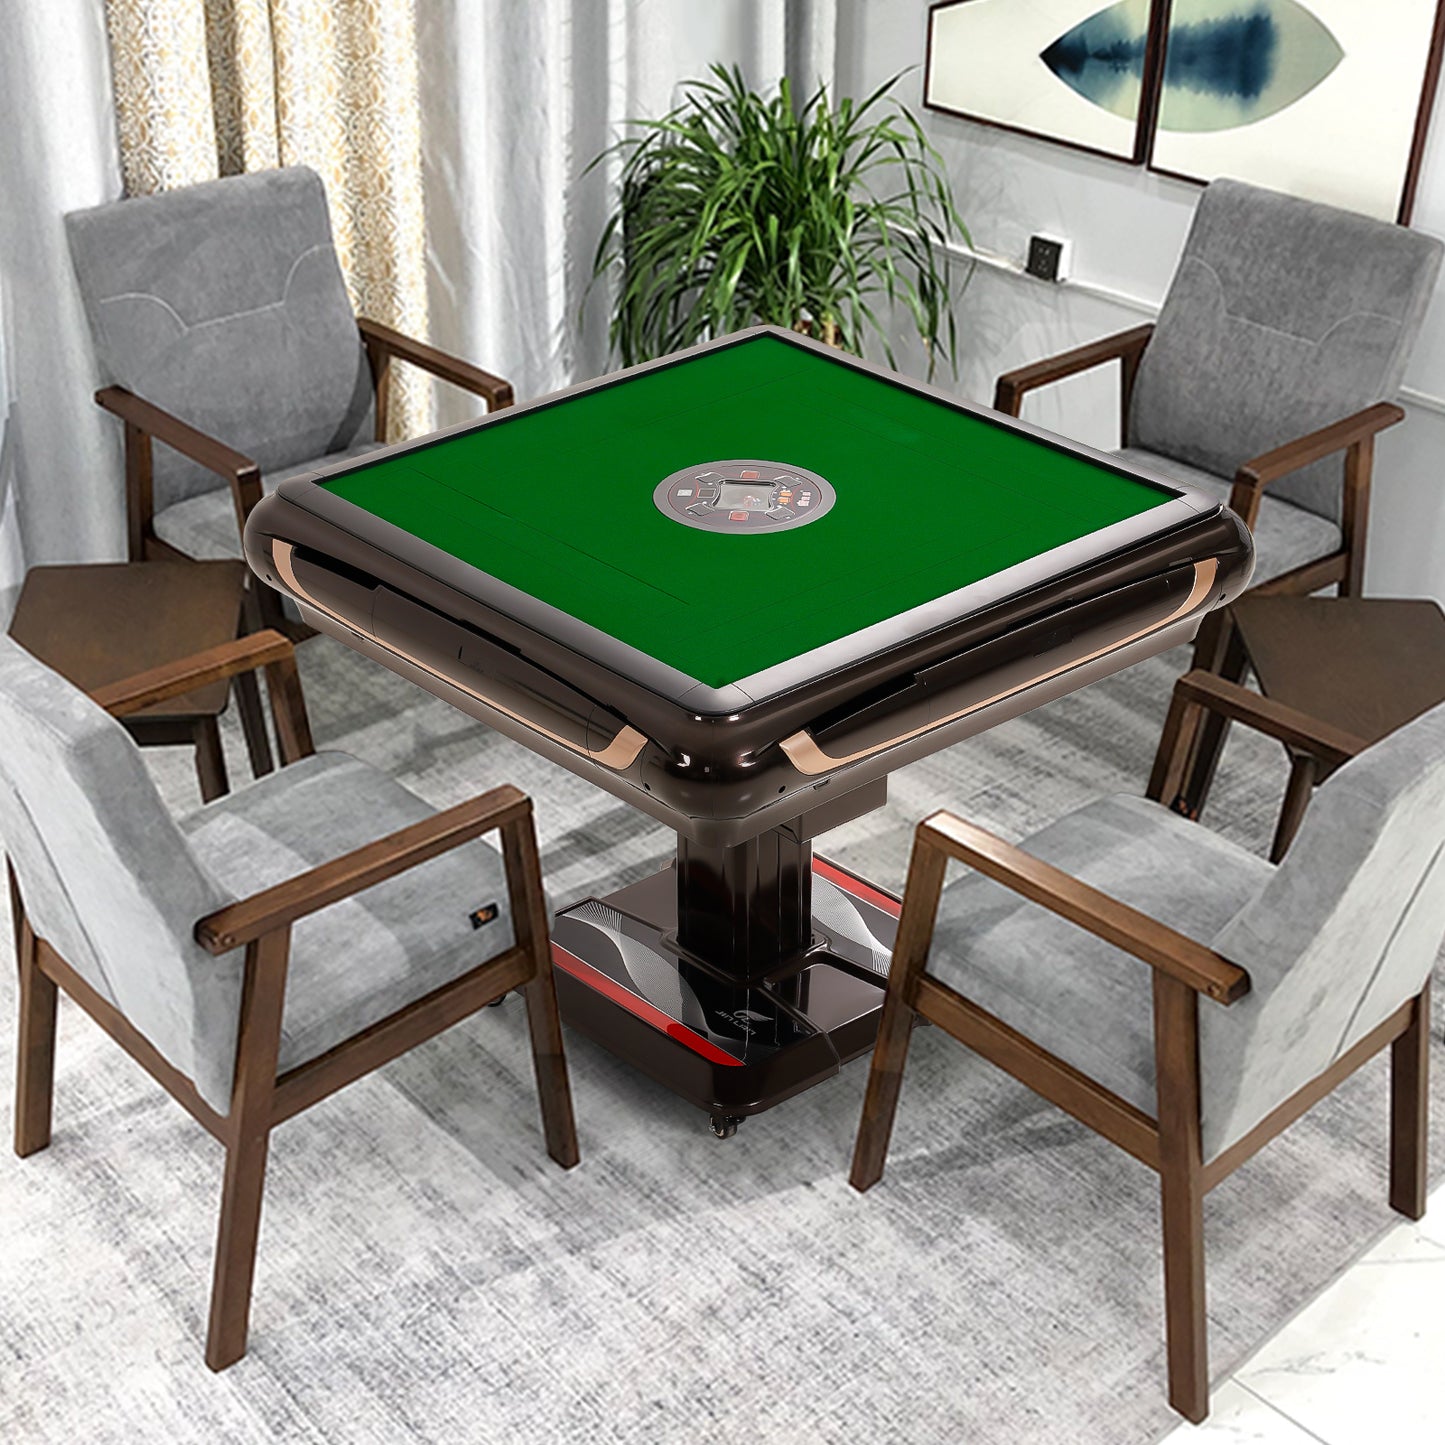 ASMILITY 44 mm X-Large Tiles Automatic Mahjong Dining / Game Table with 4 Drawers and Cup Holder